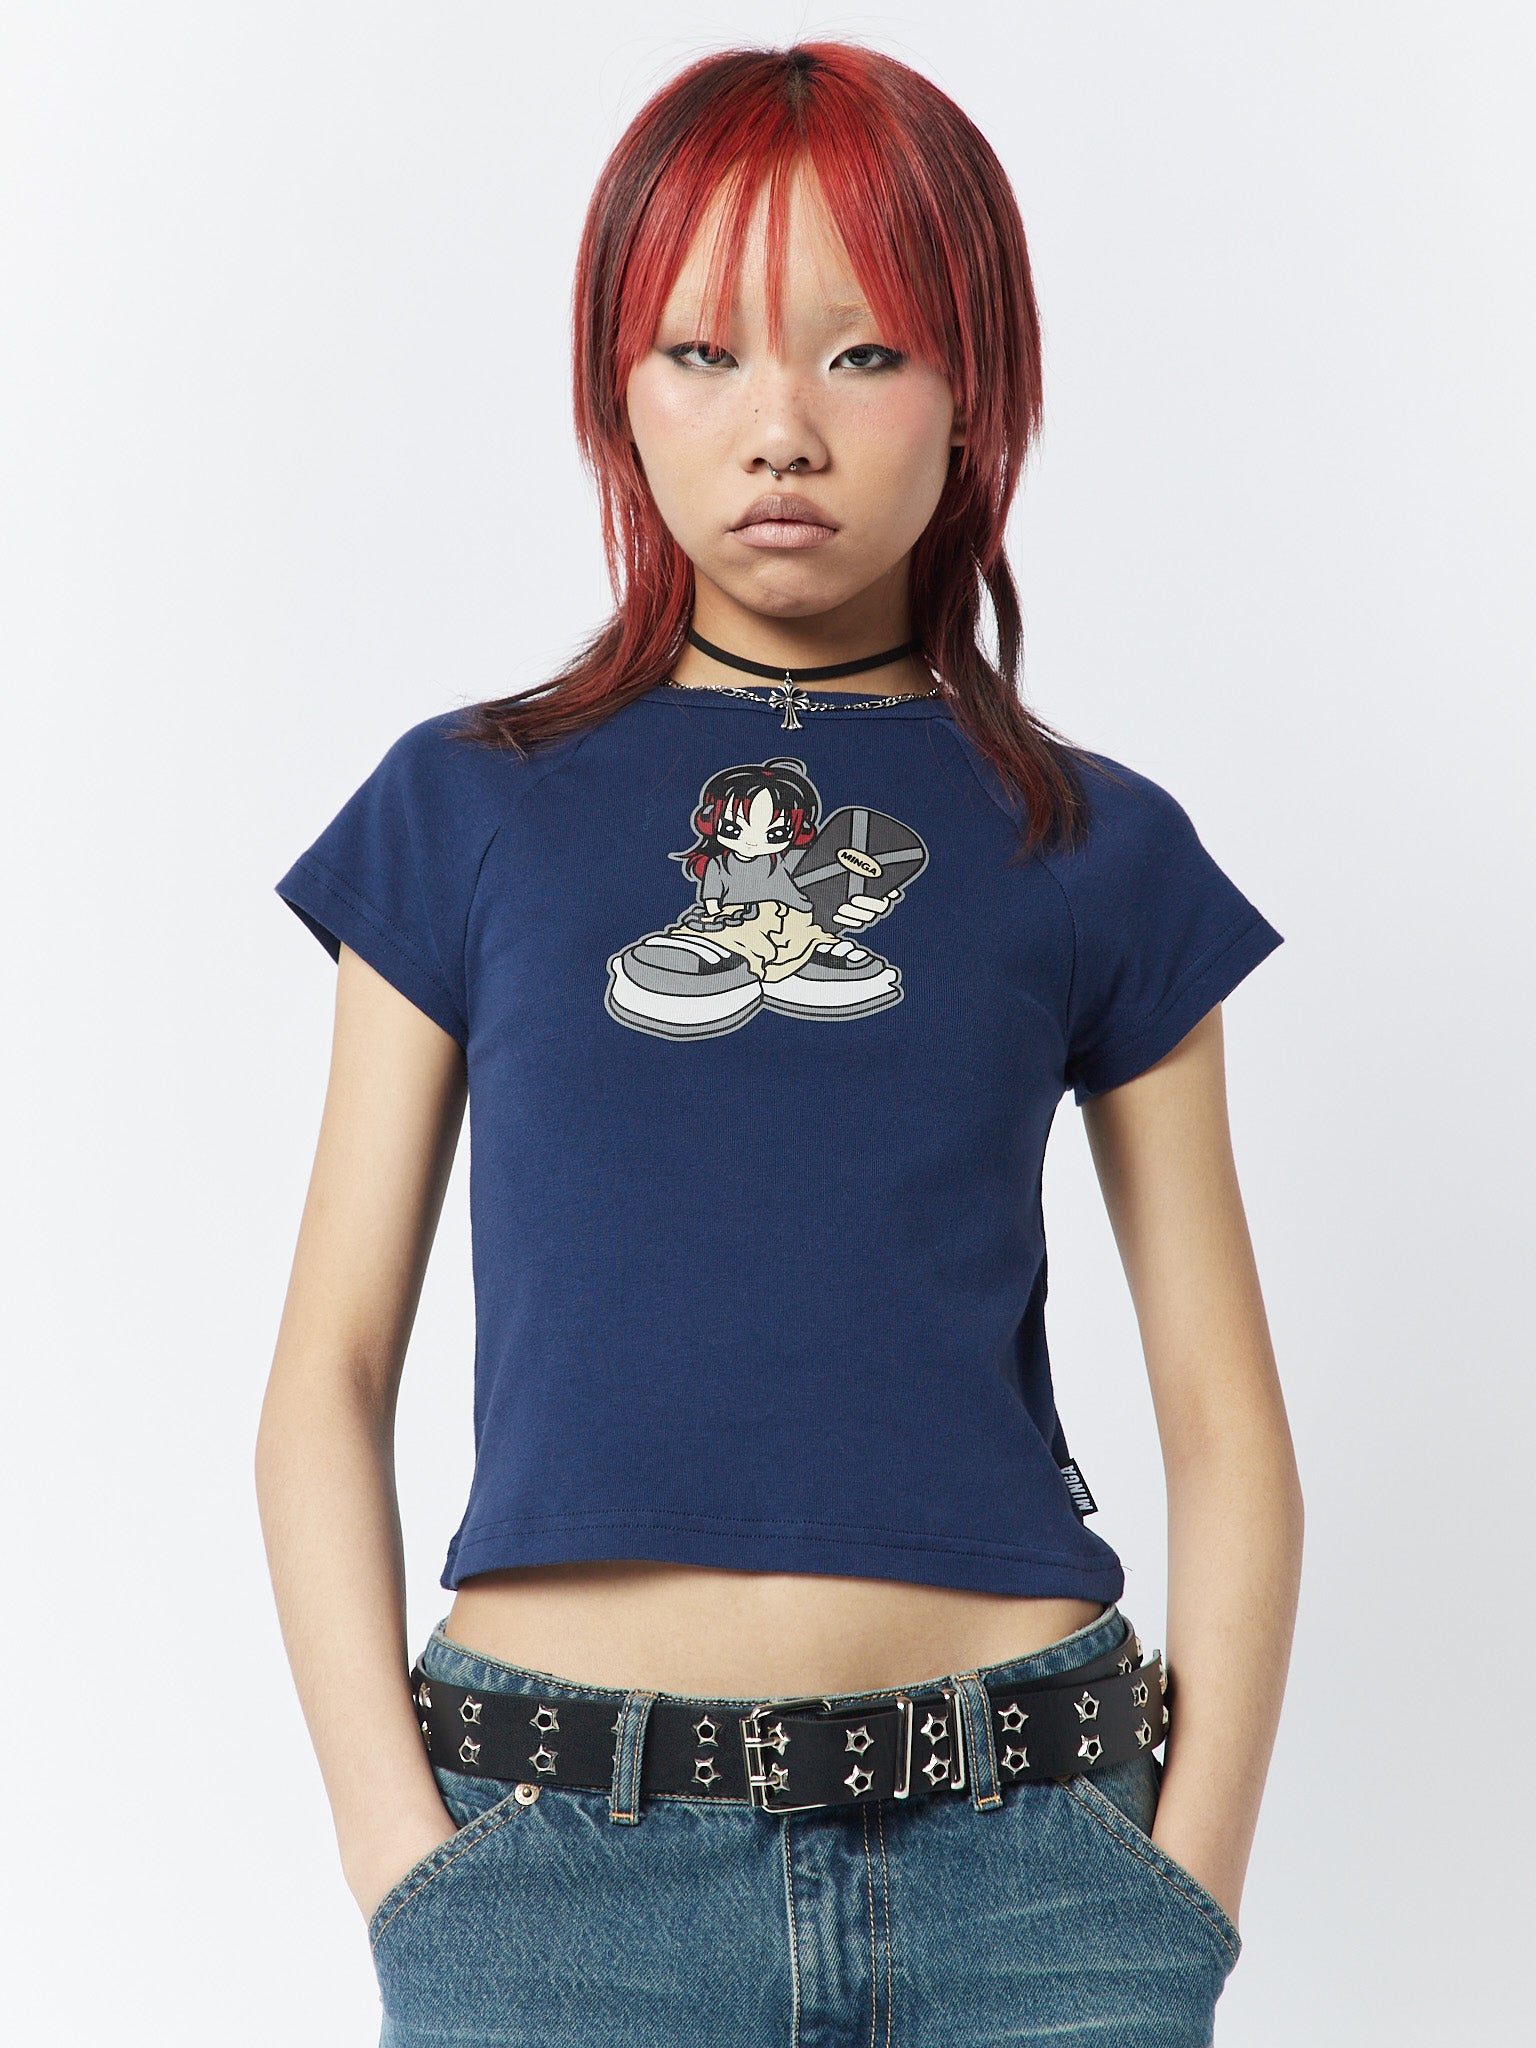  A blue baby tee with a skater girl graphic, showcasing a cool and playful design for an effortlessly stylish look.